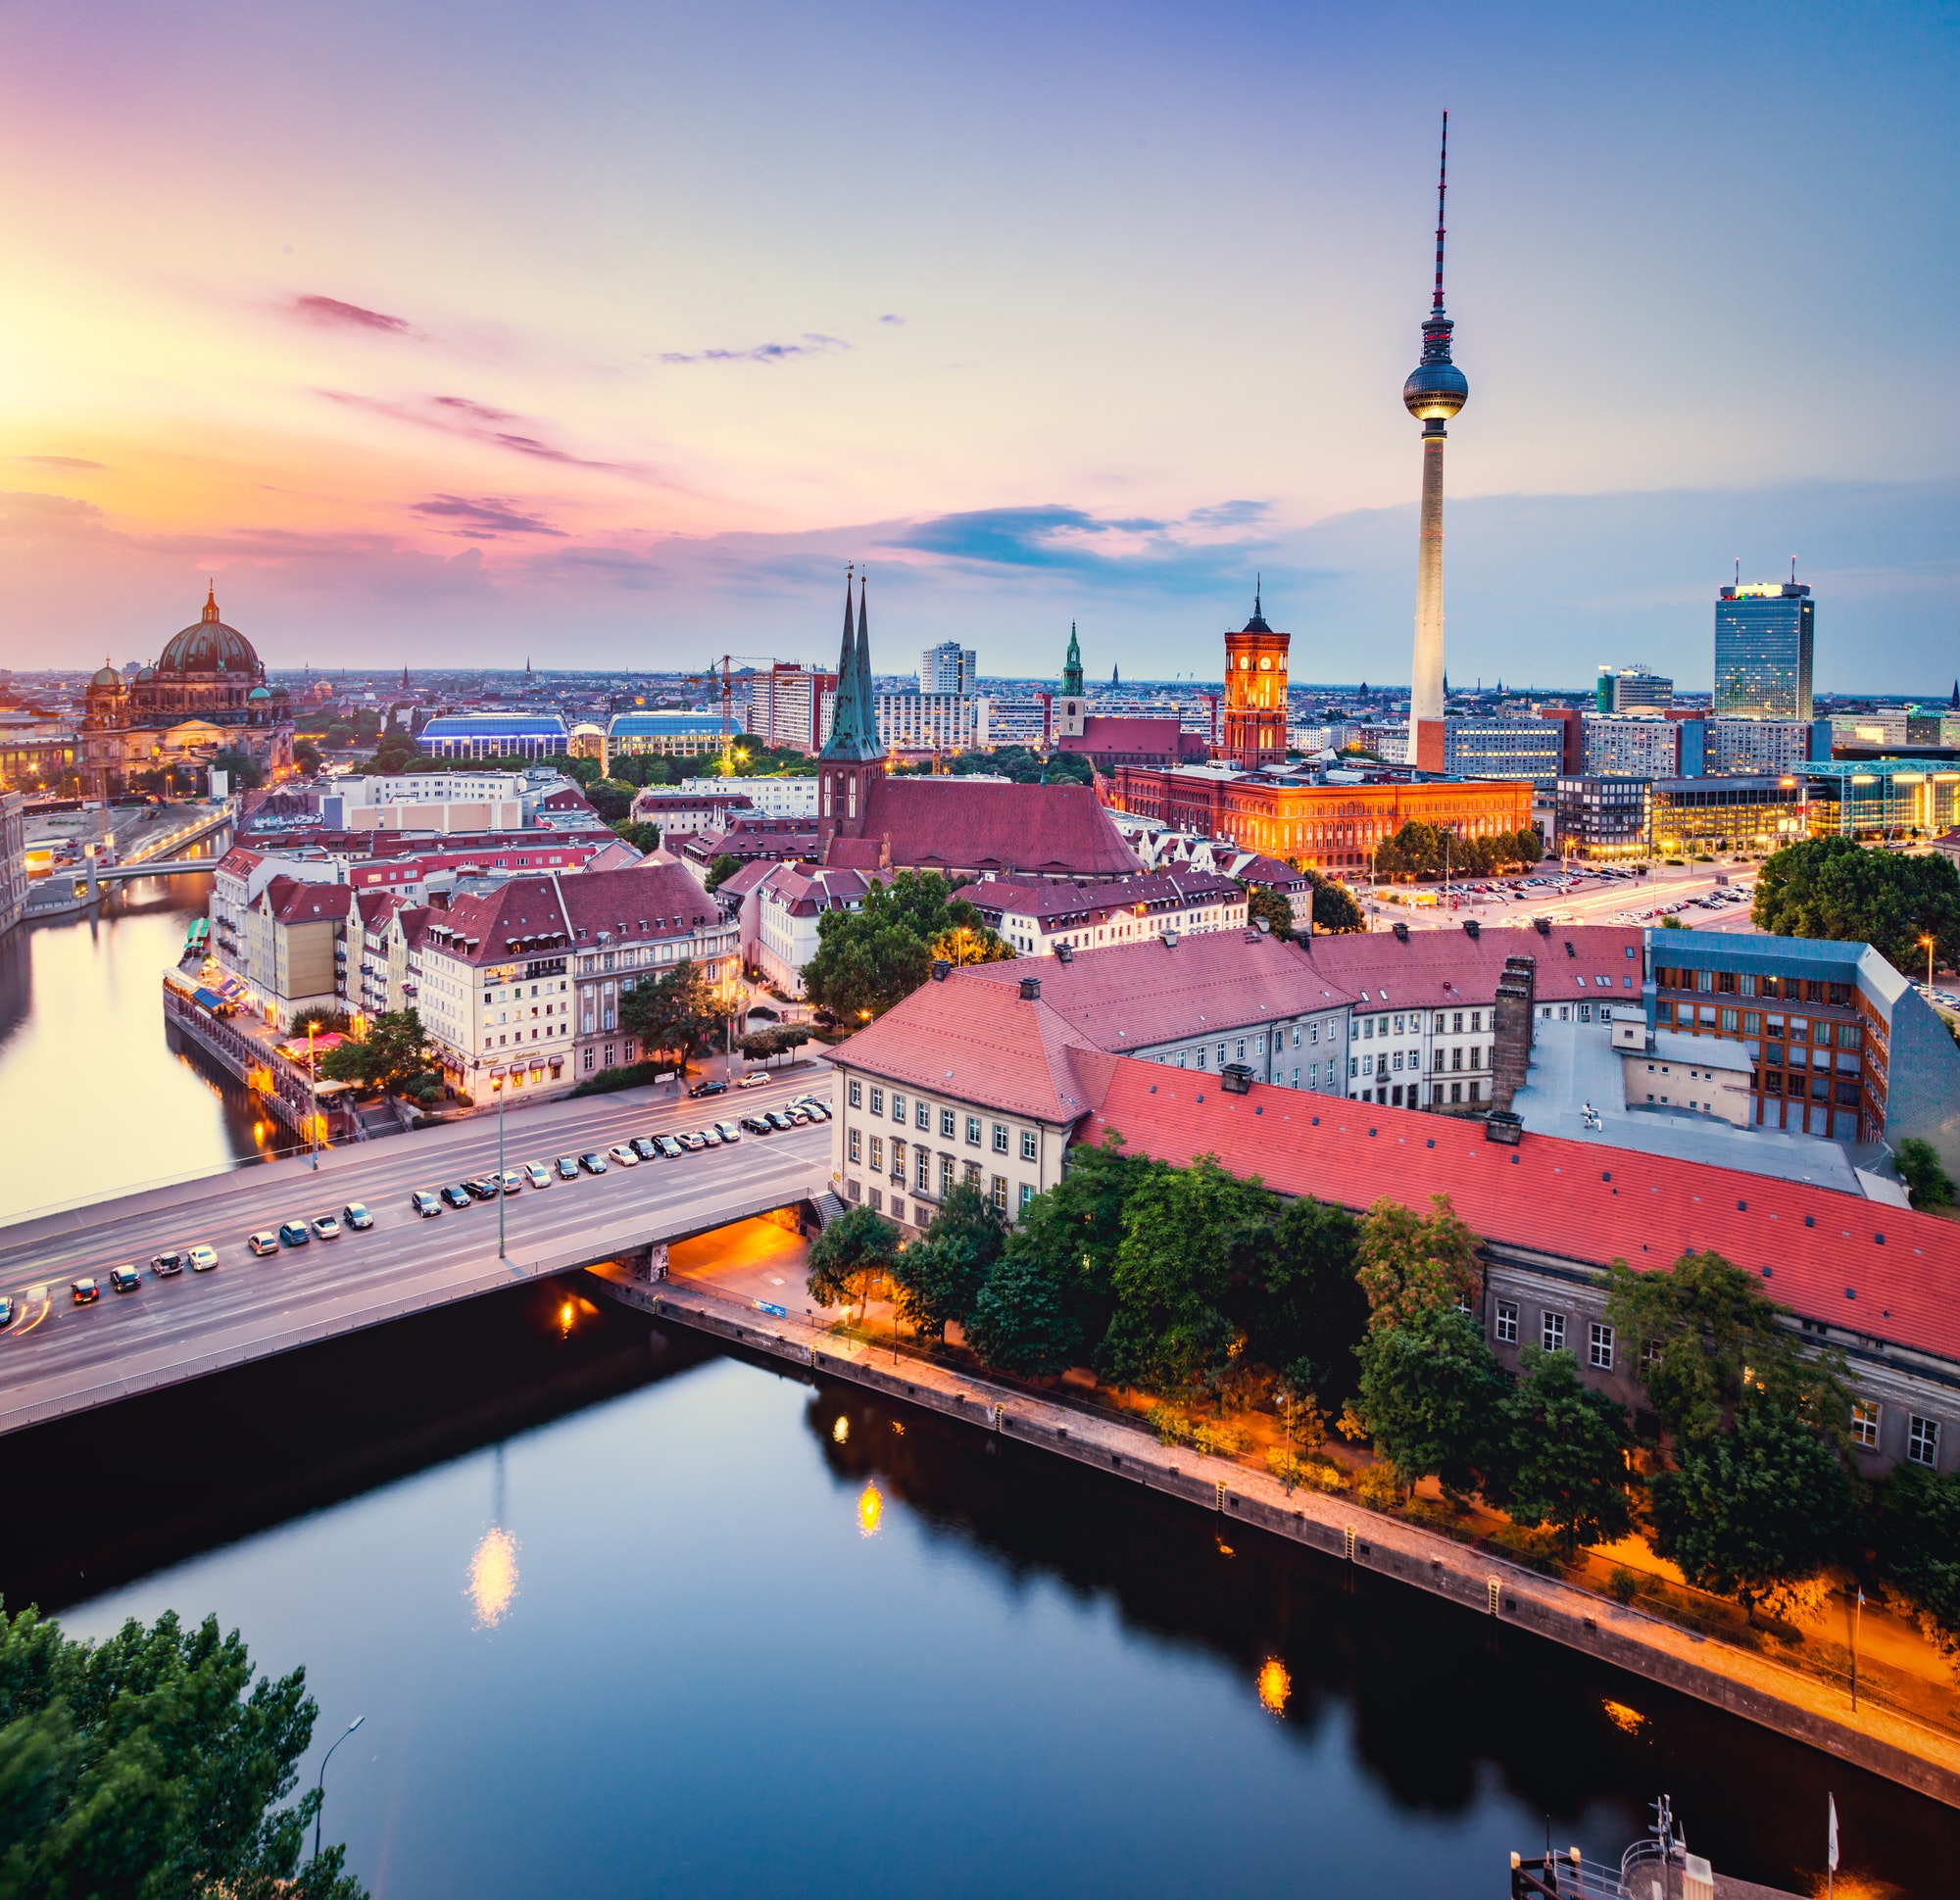 Berlin, Germany at sunset.